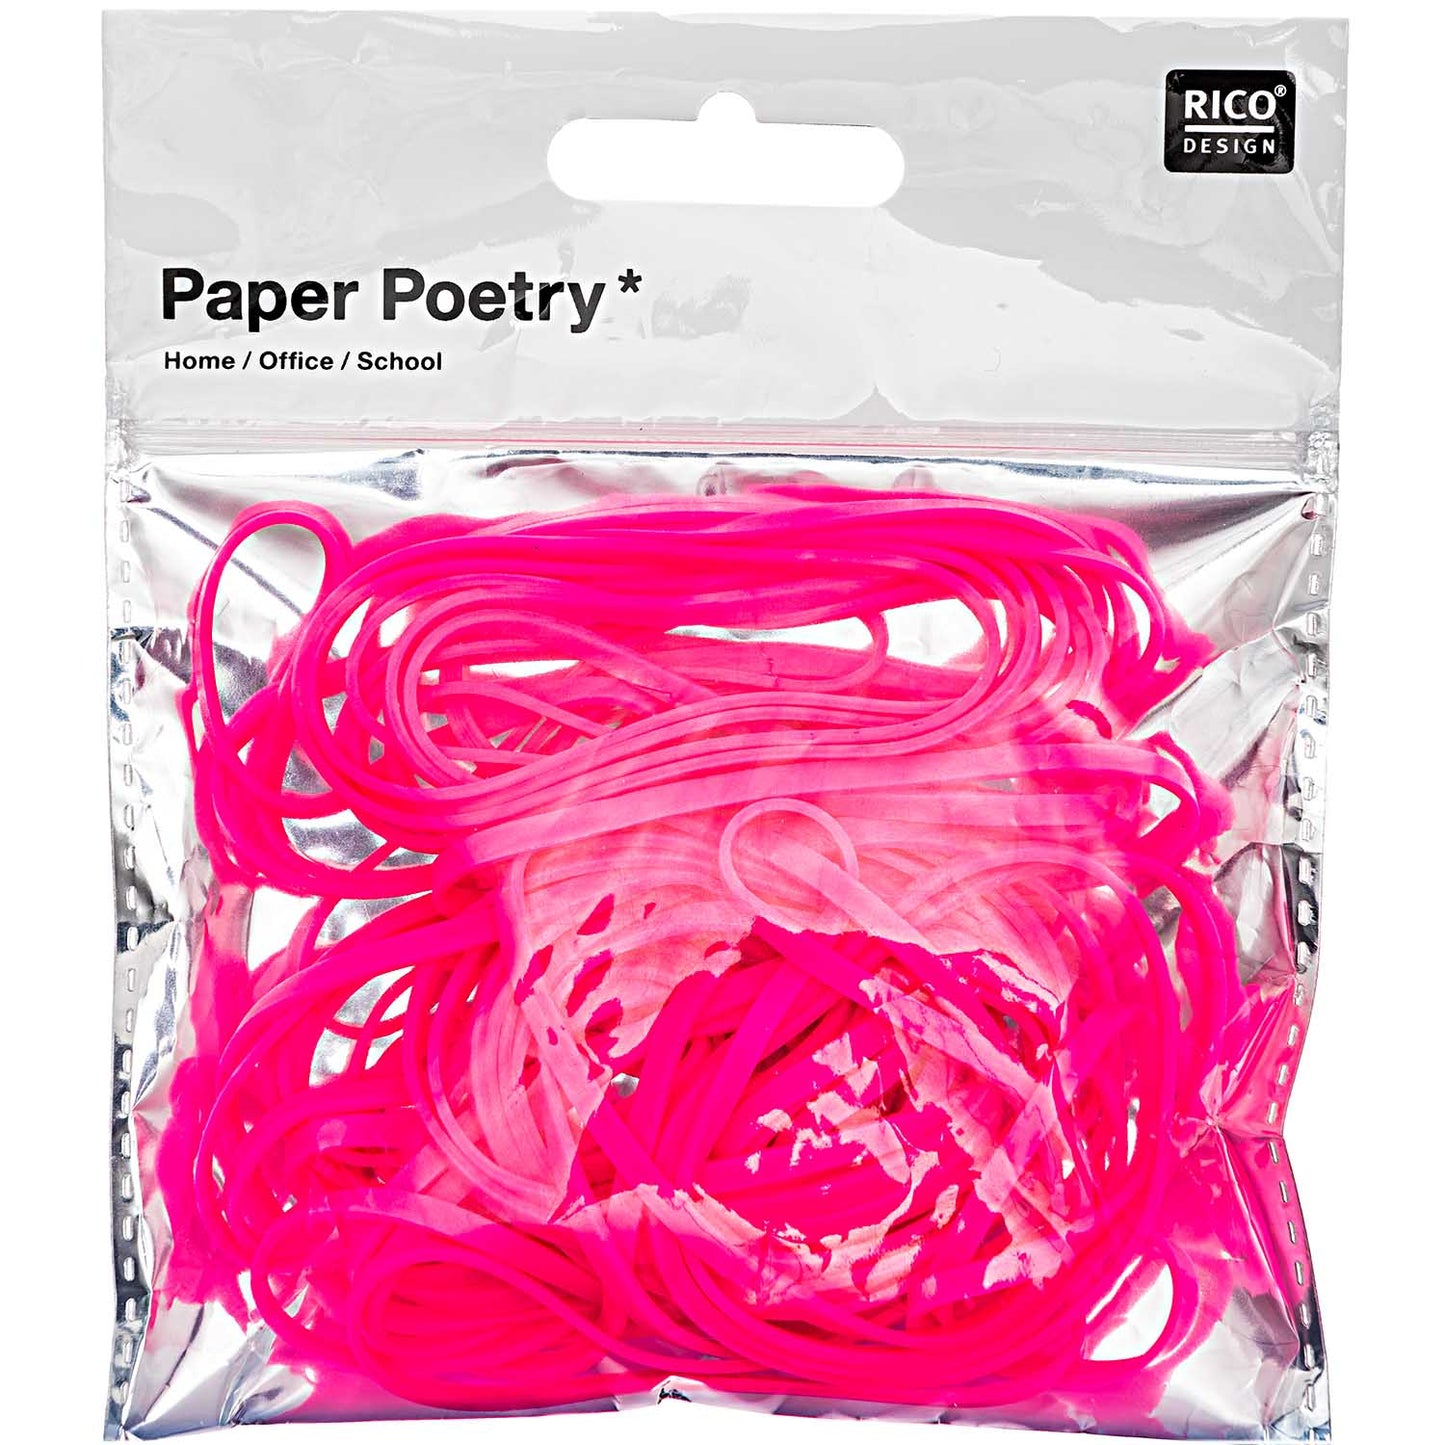 Neon Pink Rubber bands